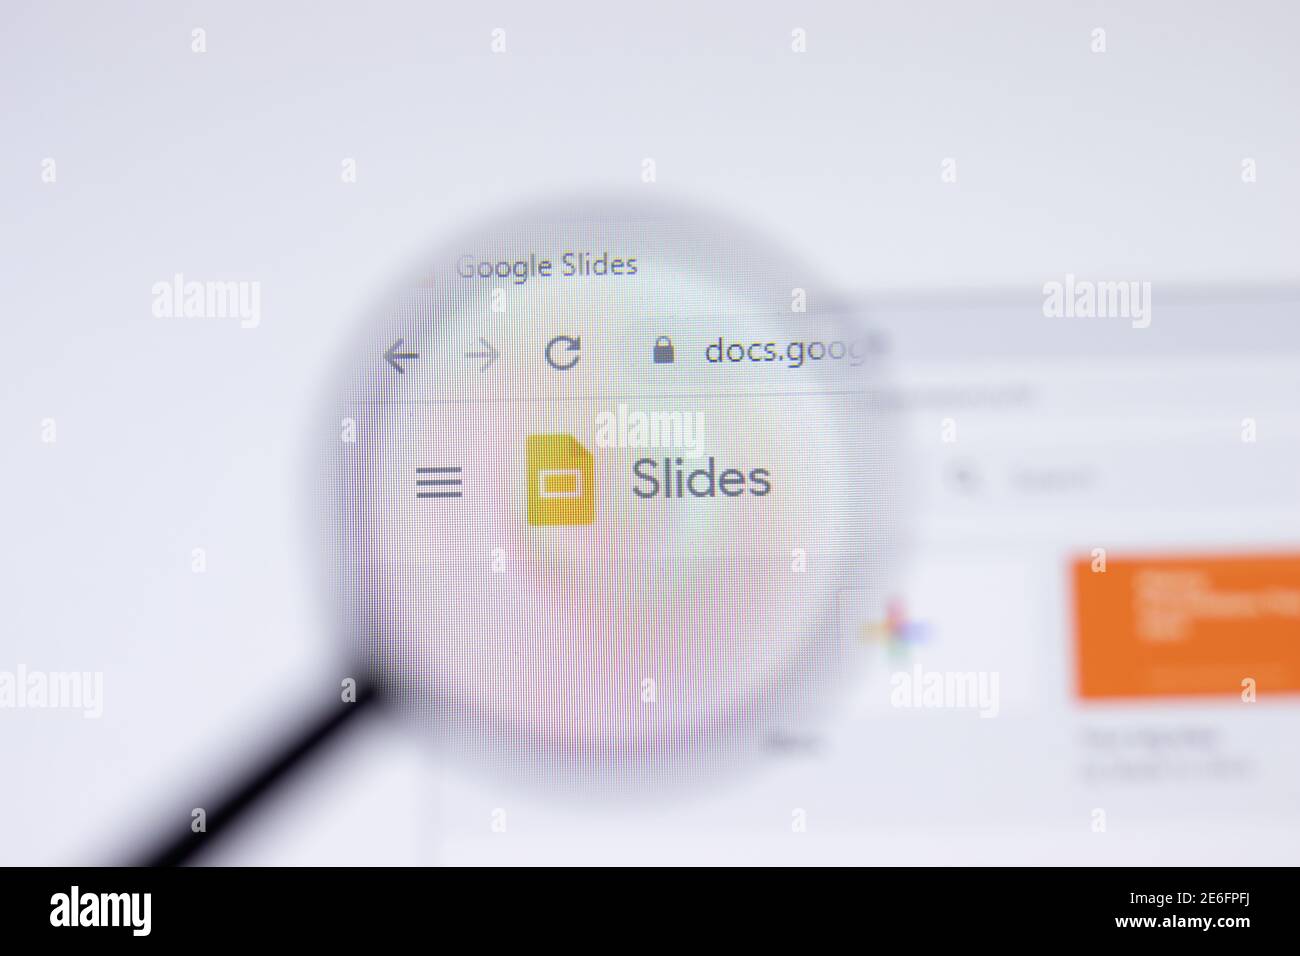 Saint Petersburg, Russia - 28 January 2021: Google Slides website page with logo close-up, Illustrative Editorial Stock Photo